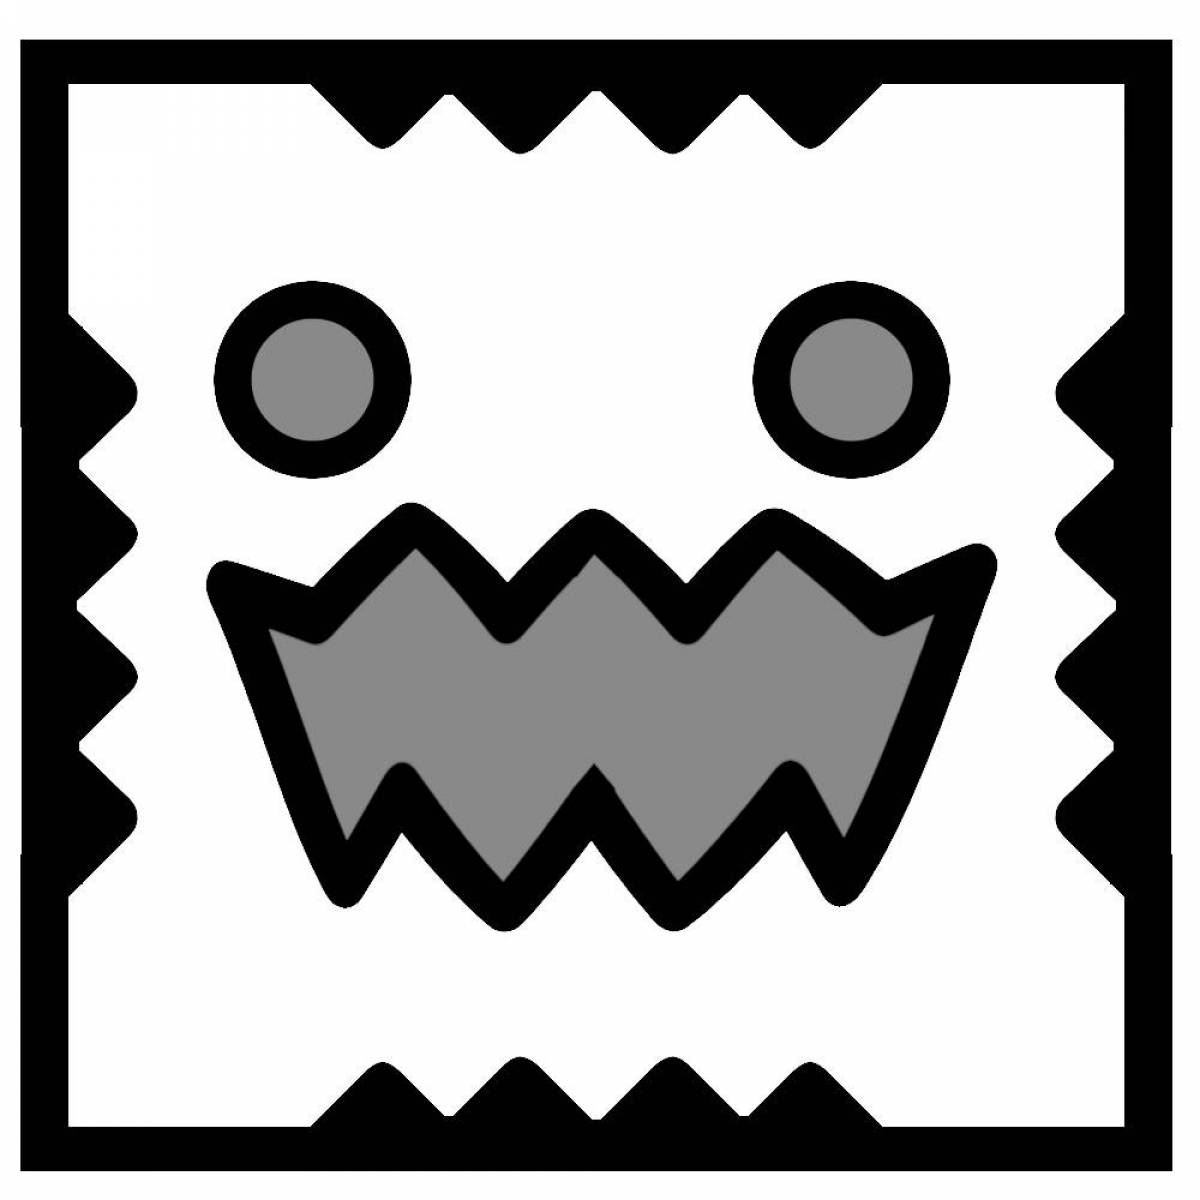 Coloring-quest geometry dash coloring page